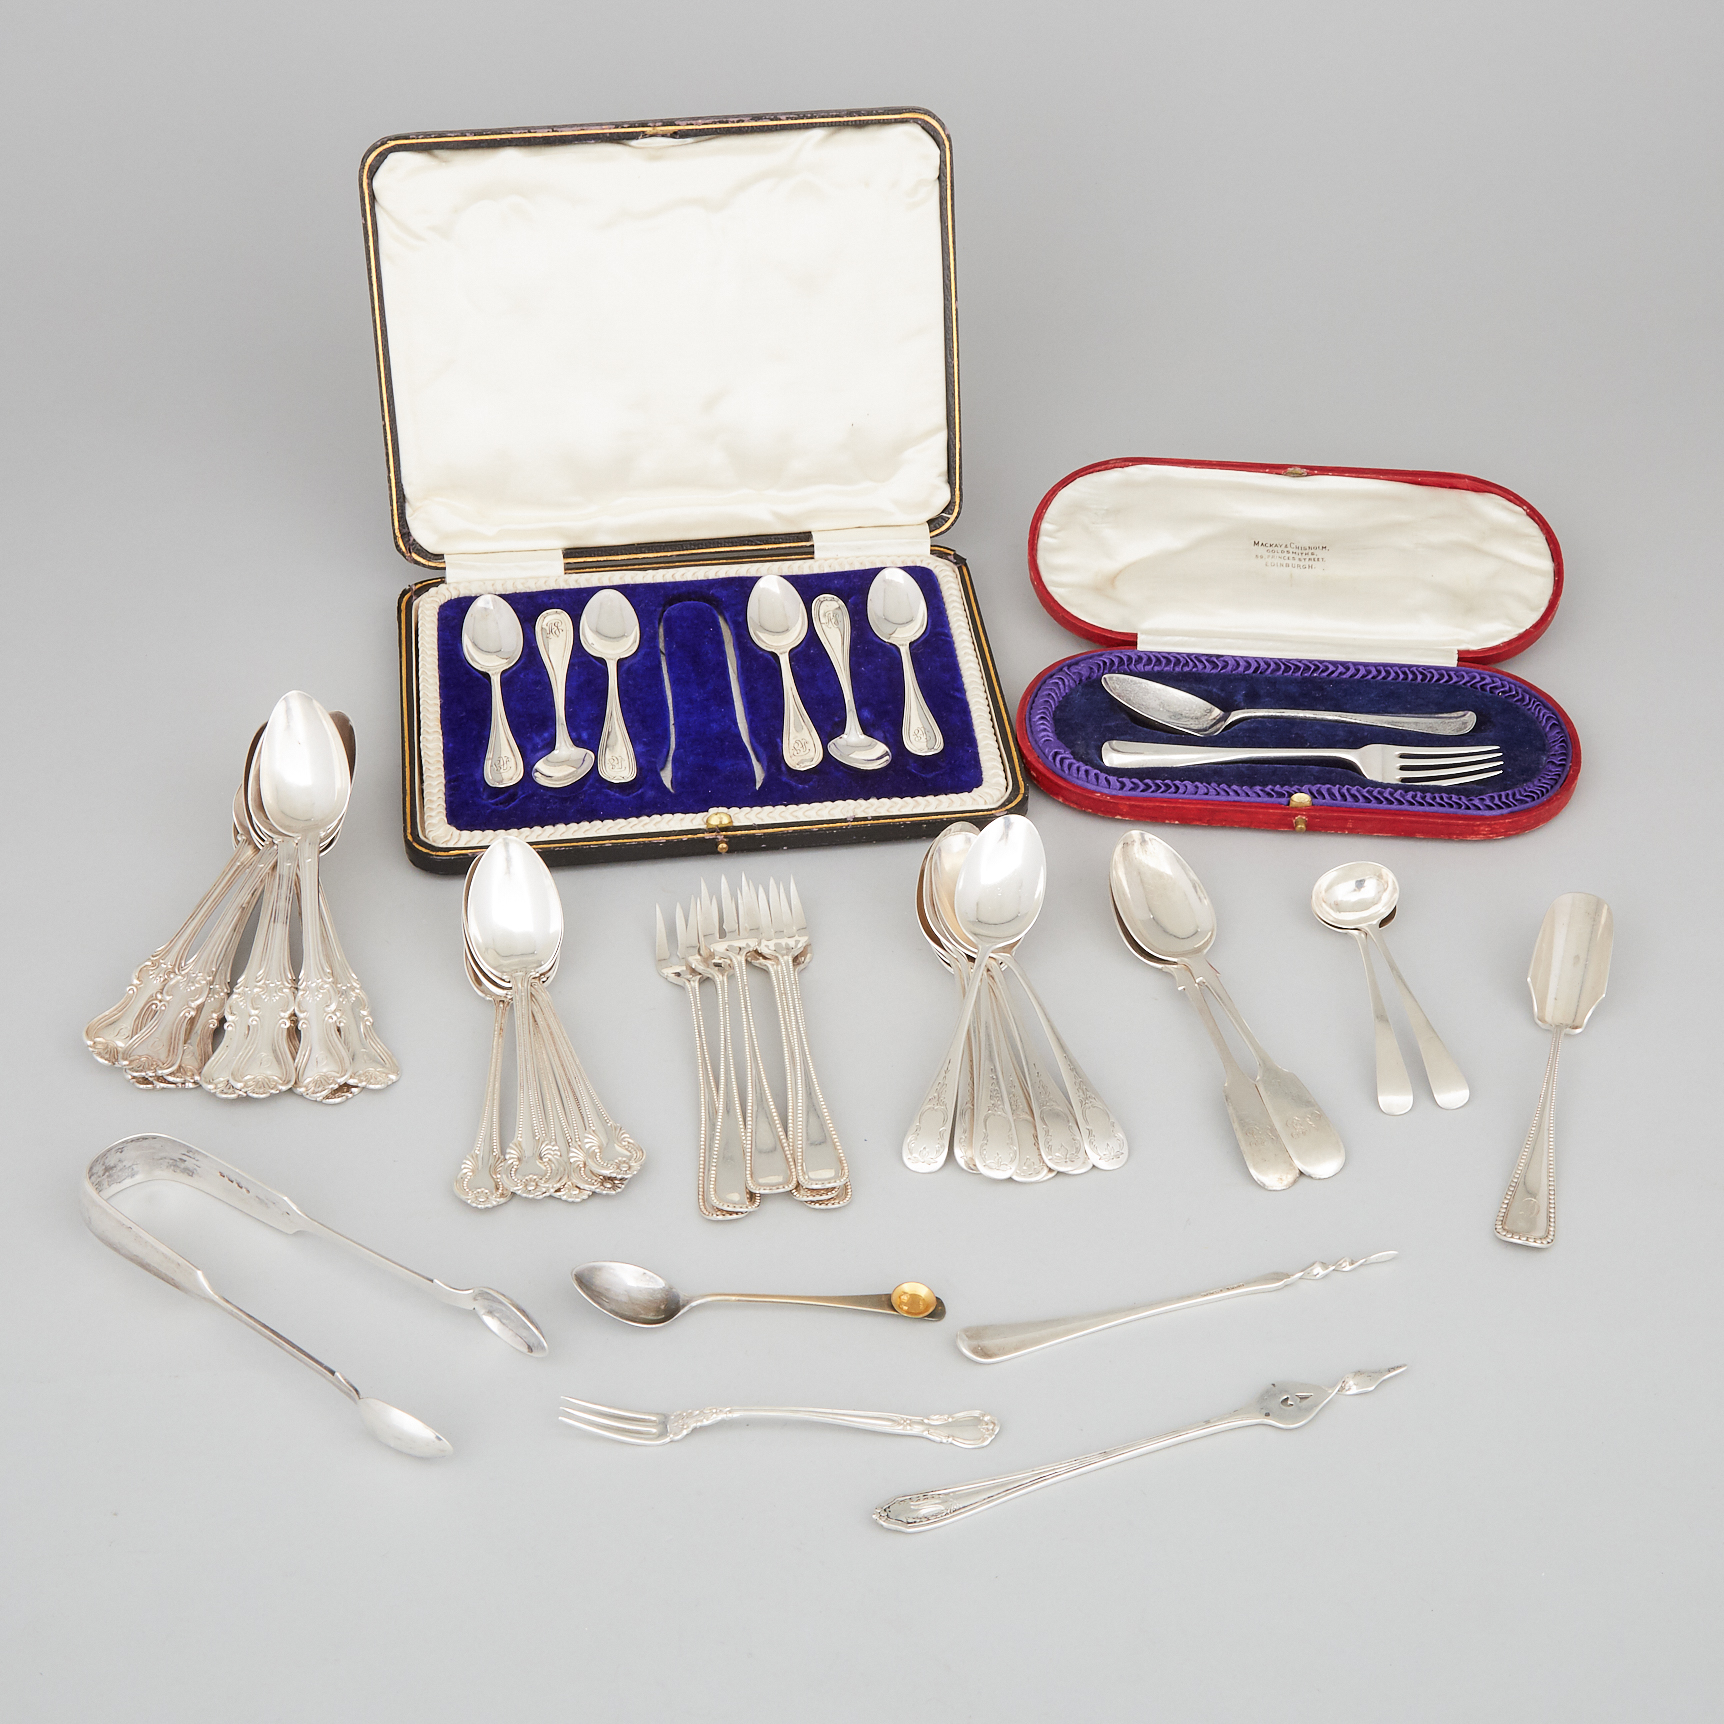 Group of English and North American Silver Flatware, mid-19th/20th century